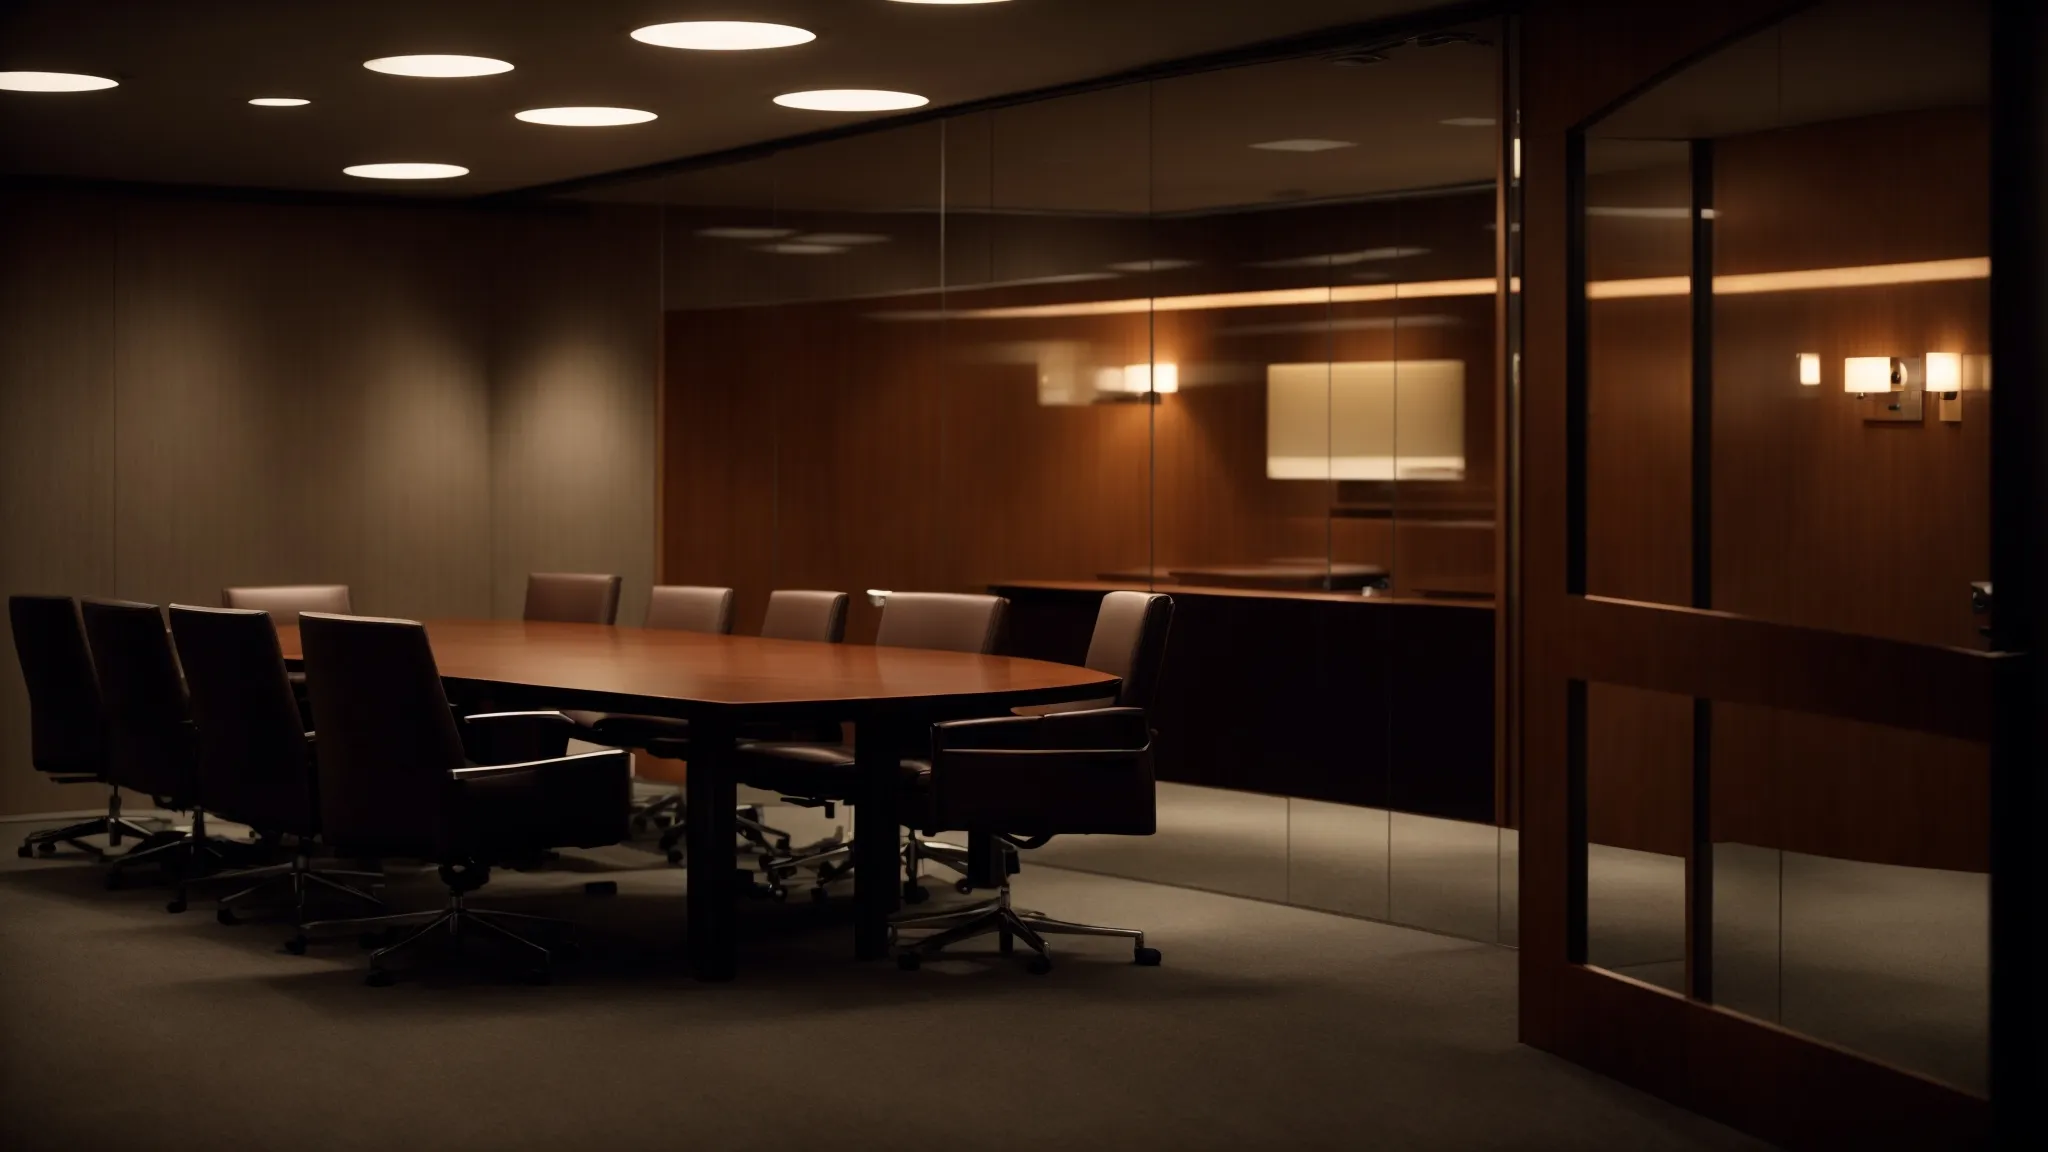 a dimly lit conference room with a closed door suggests a secretive meeting taking place within.